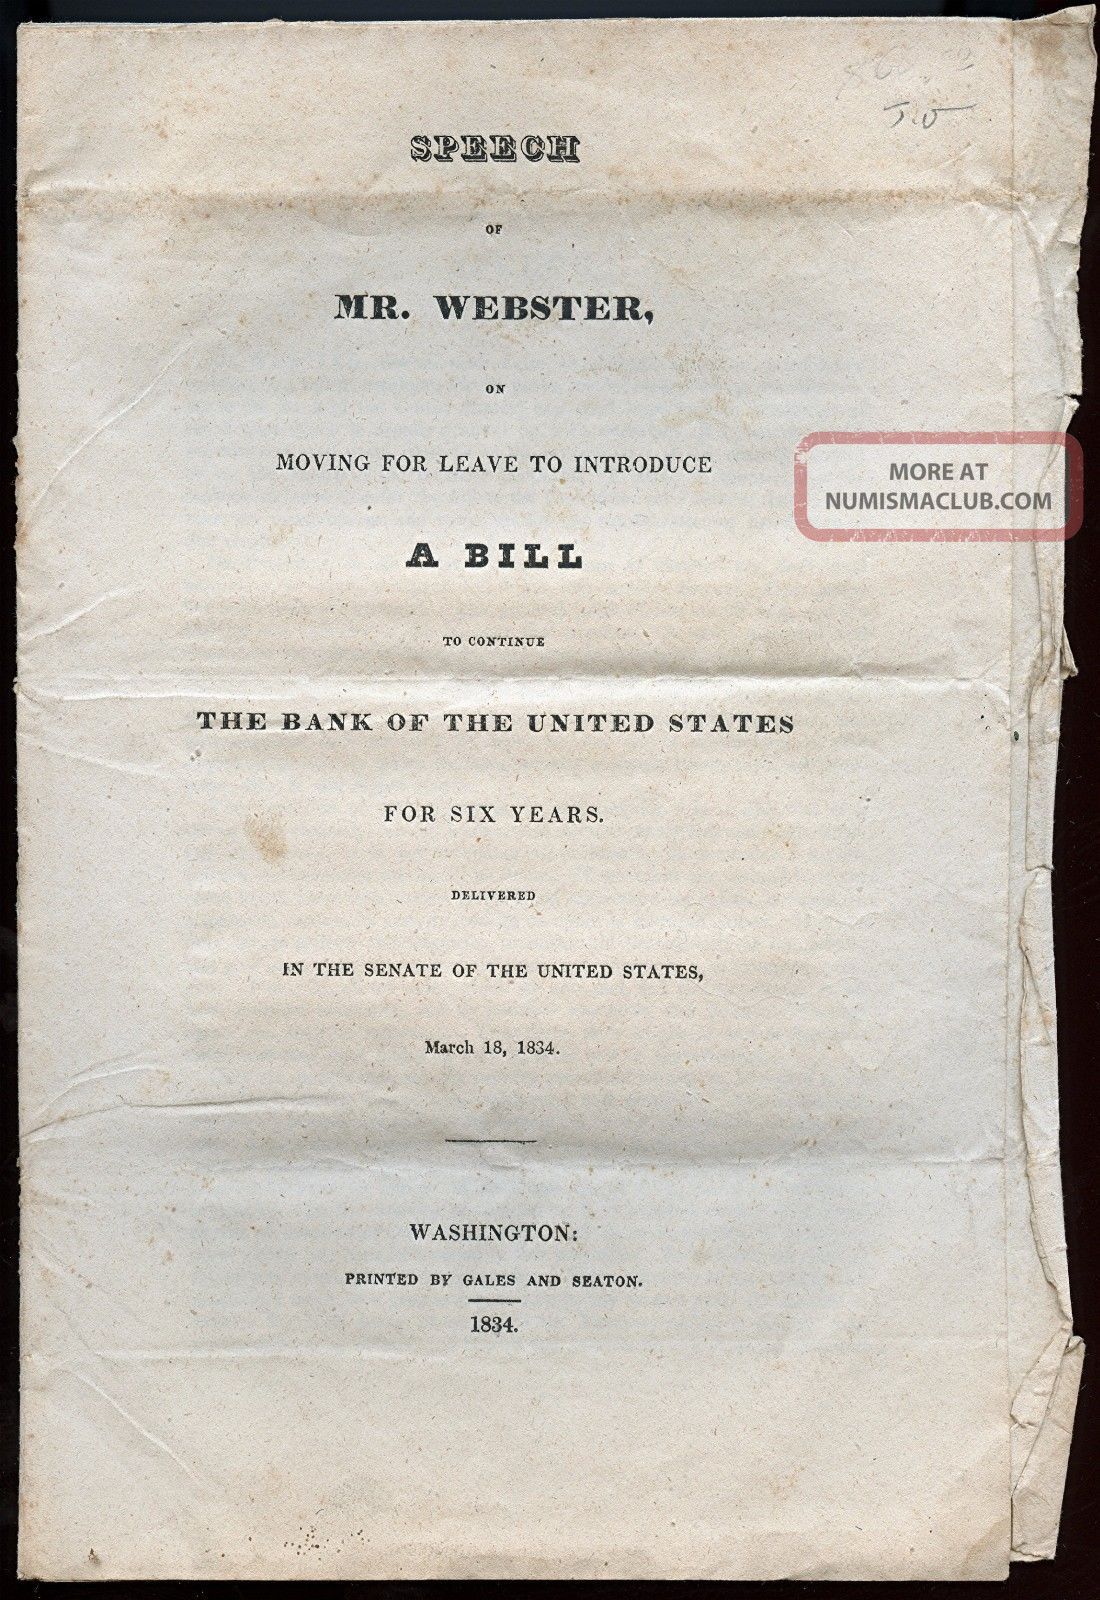 Daniel Webster Bill To Continue Bank Of The United States 1834 Stocks & Bonds, Scripophily photo